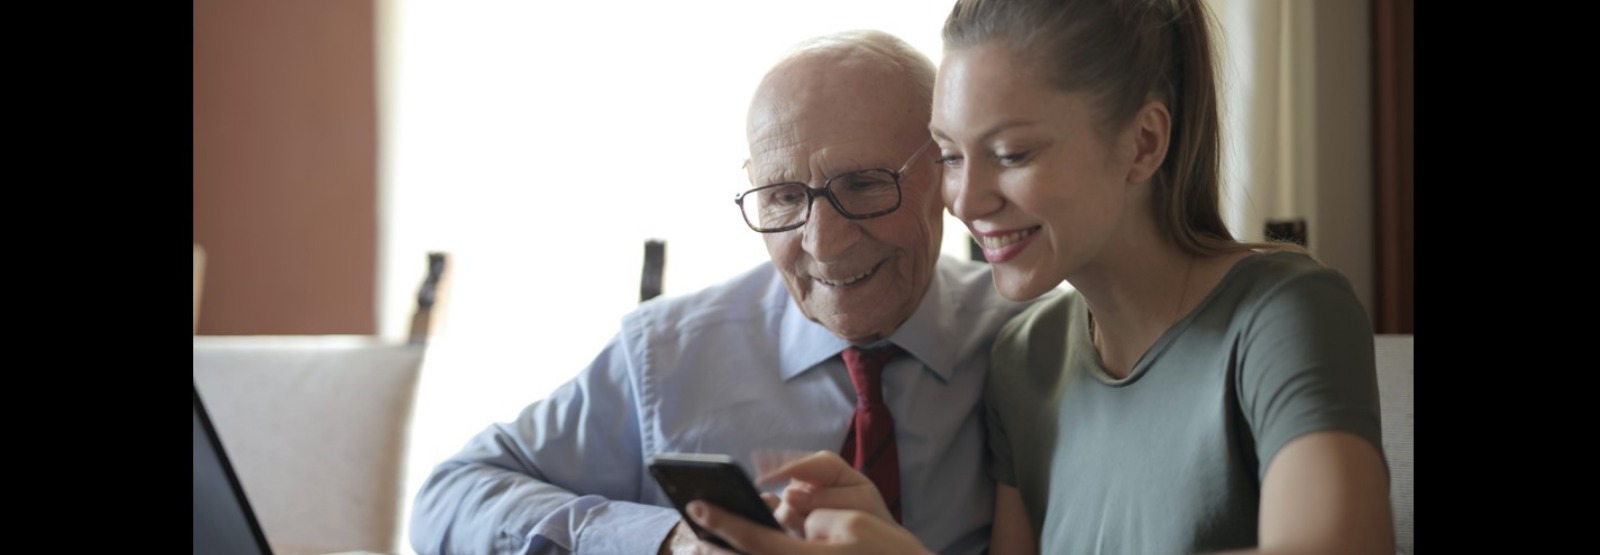 young woman and older man using cell phone